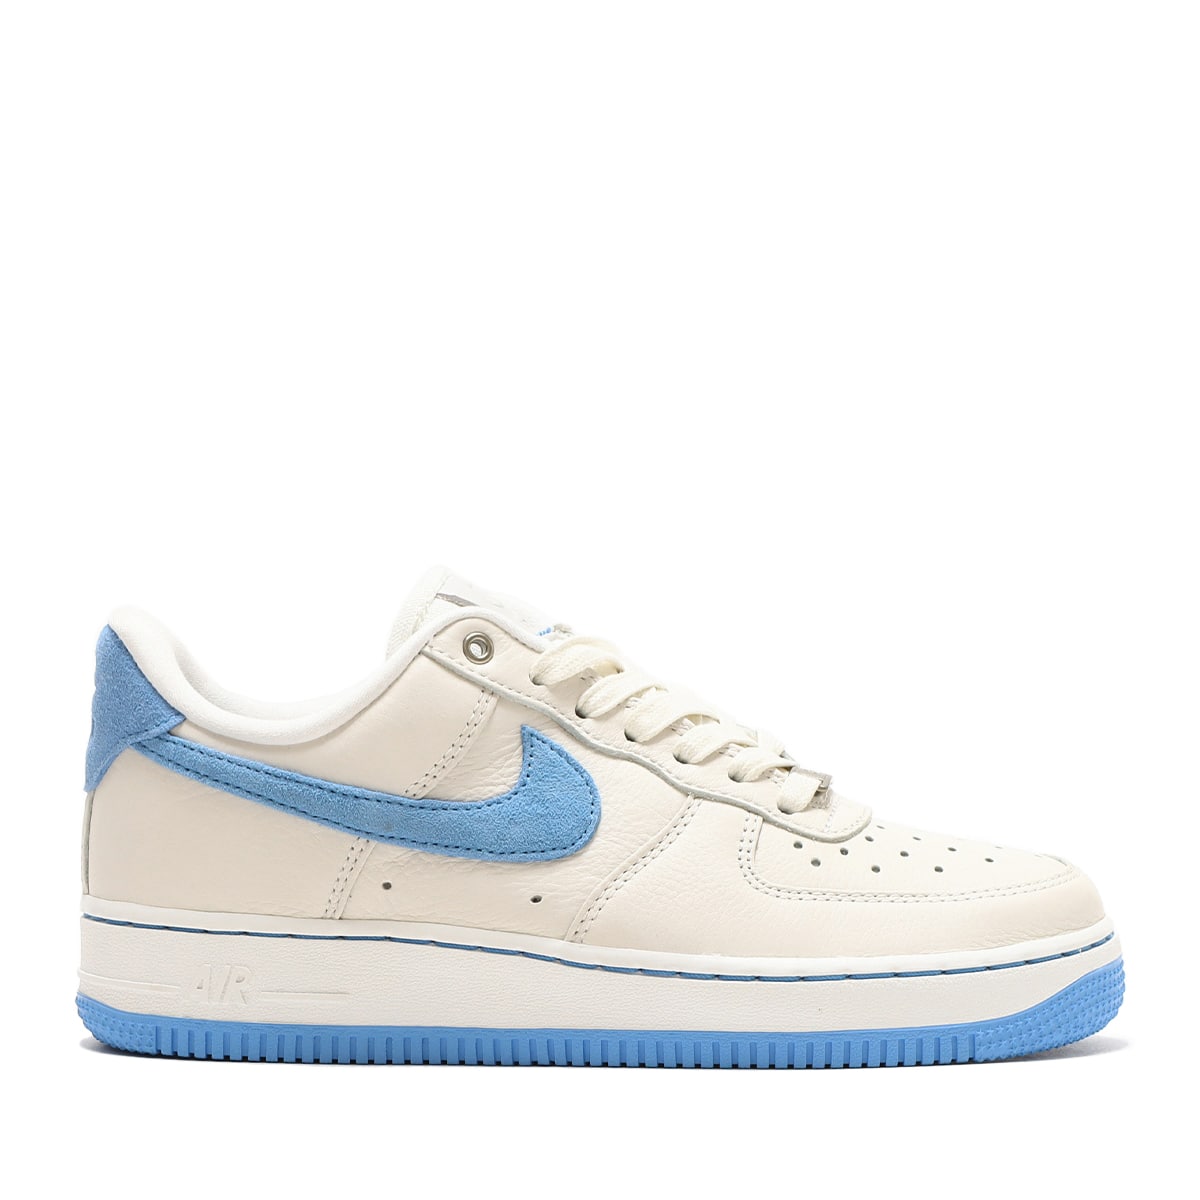 Nike Air Force 1 Low LXX "Summit White"